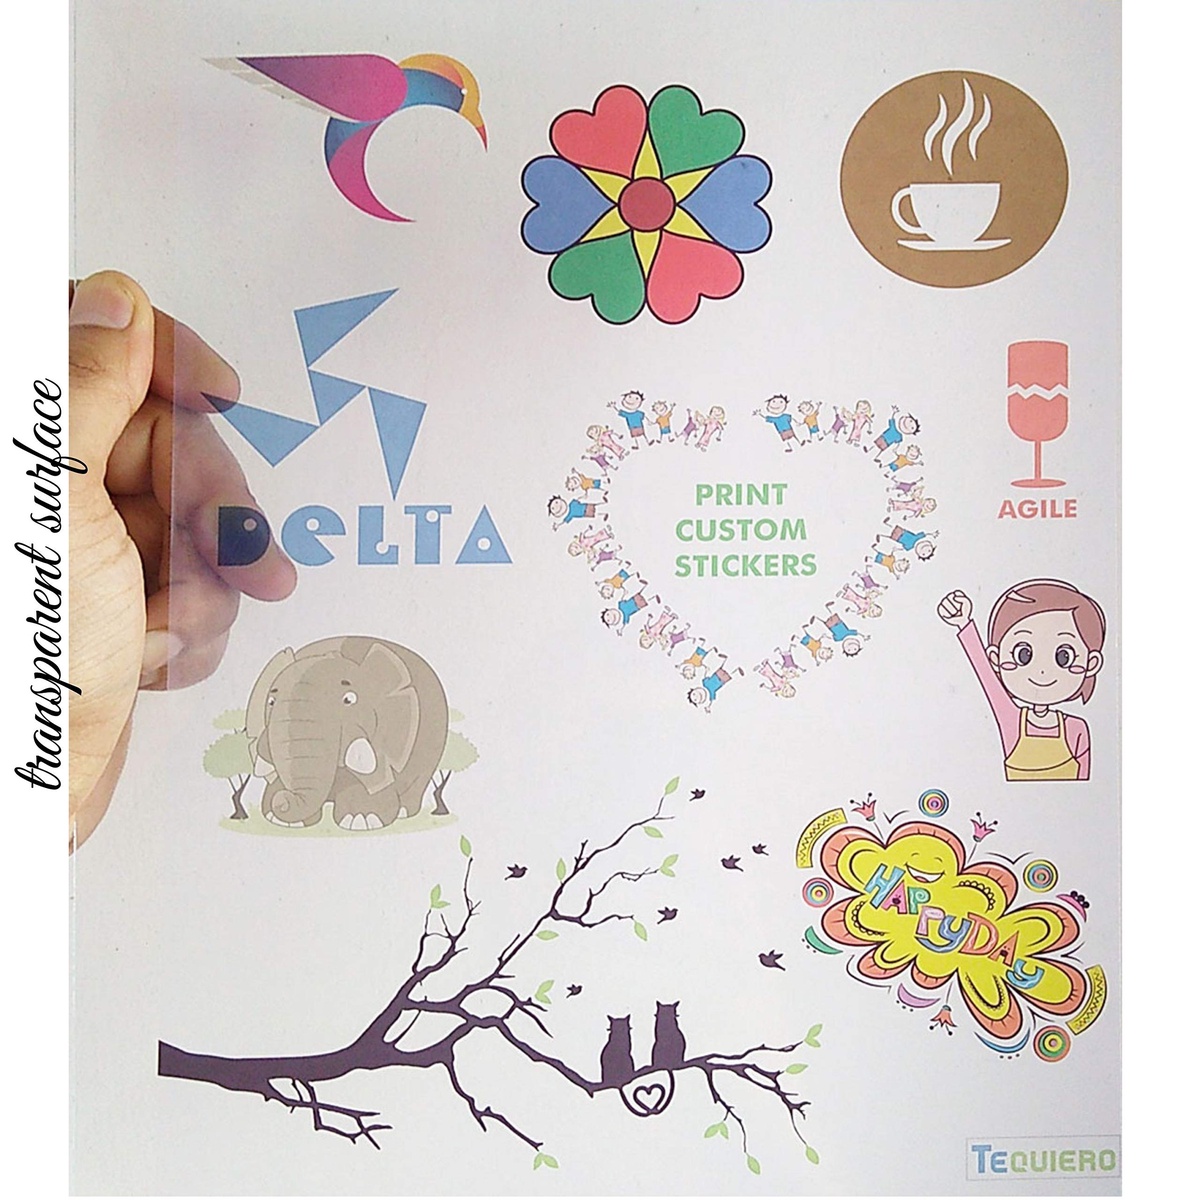 5 Guides For Using Transparent Sticker Printing in Daily Life